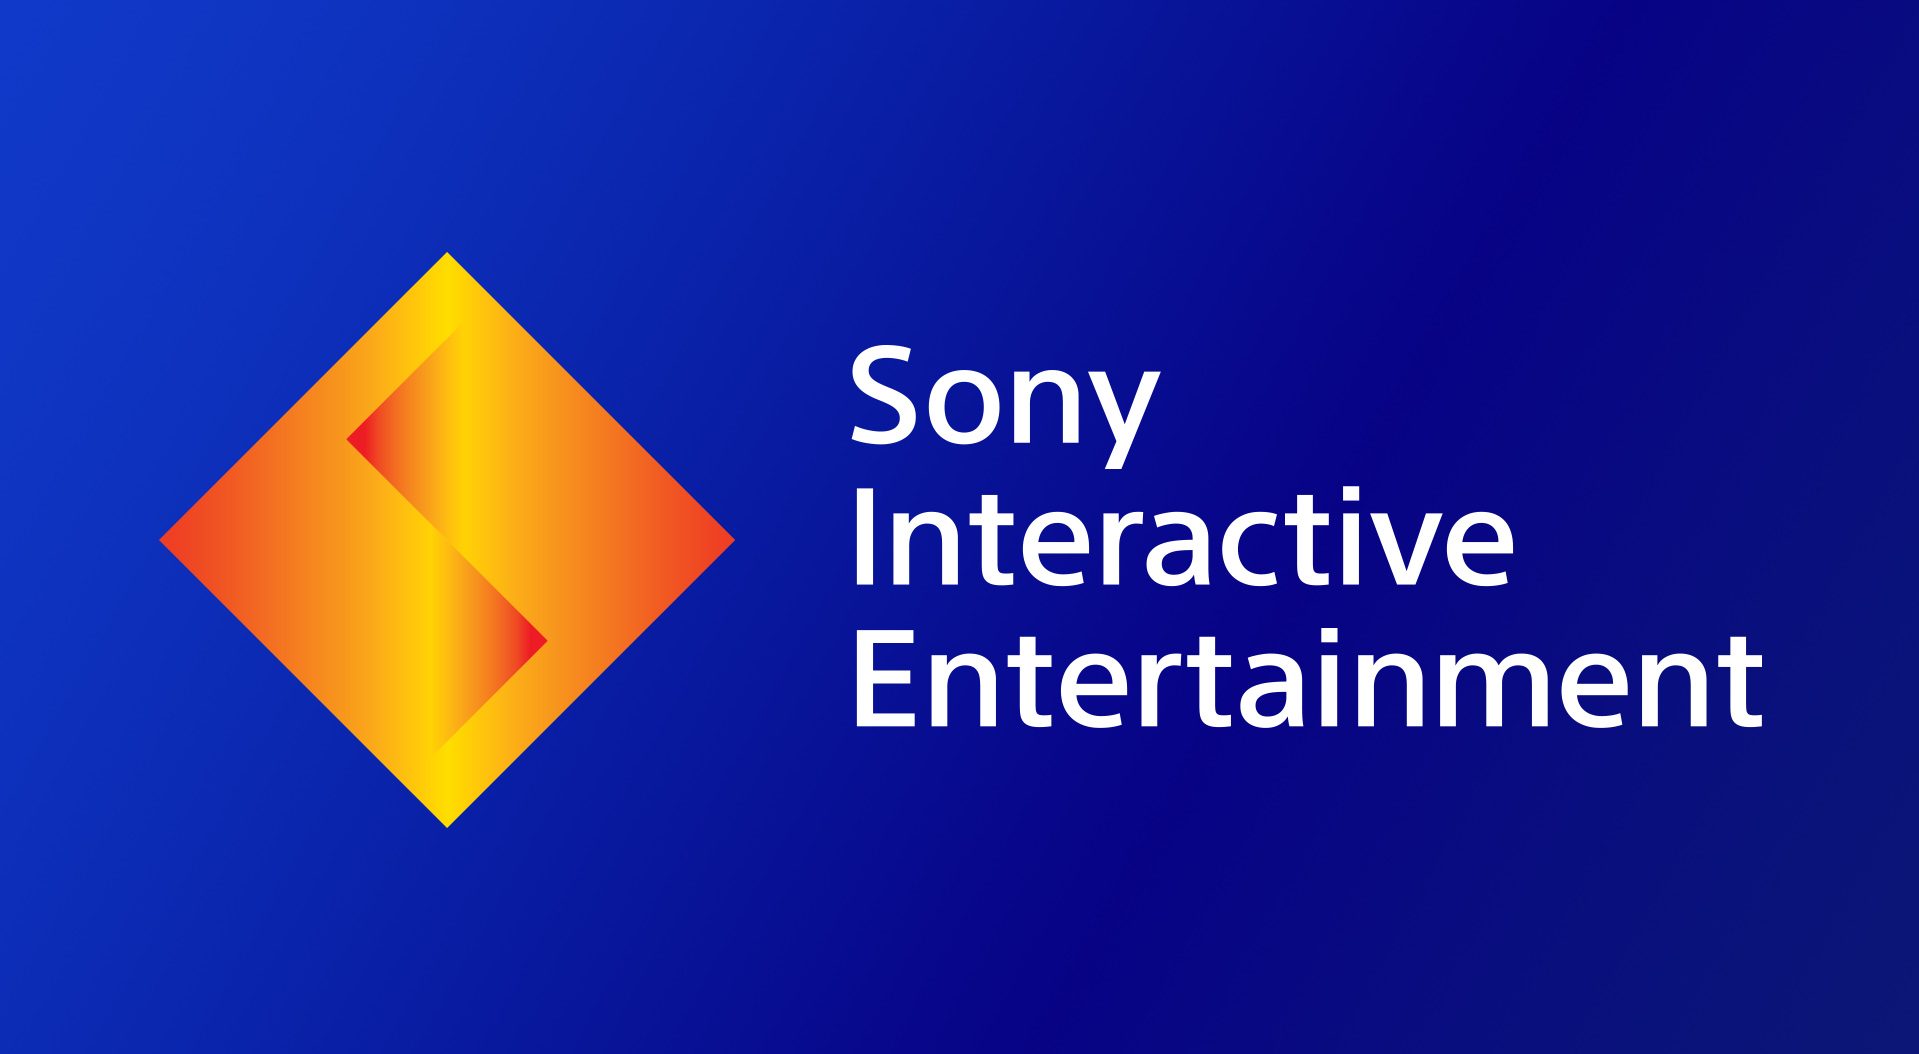 Sony Interactive Entertainment logo on a blue background